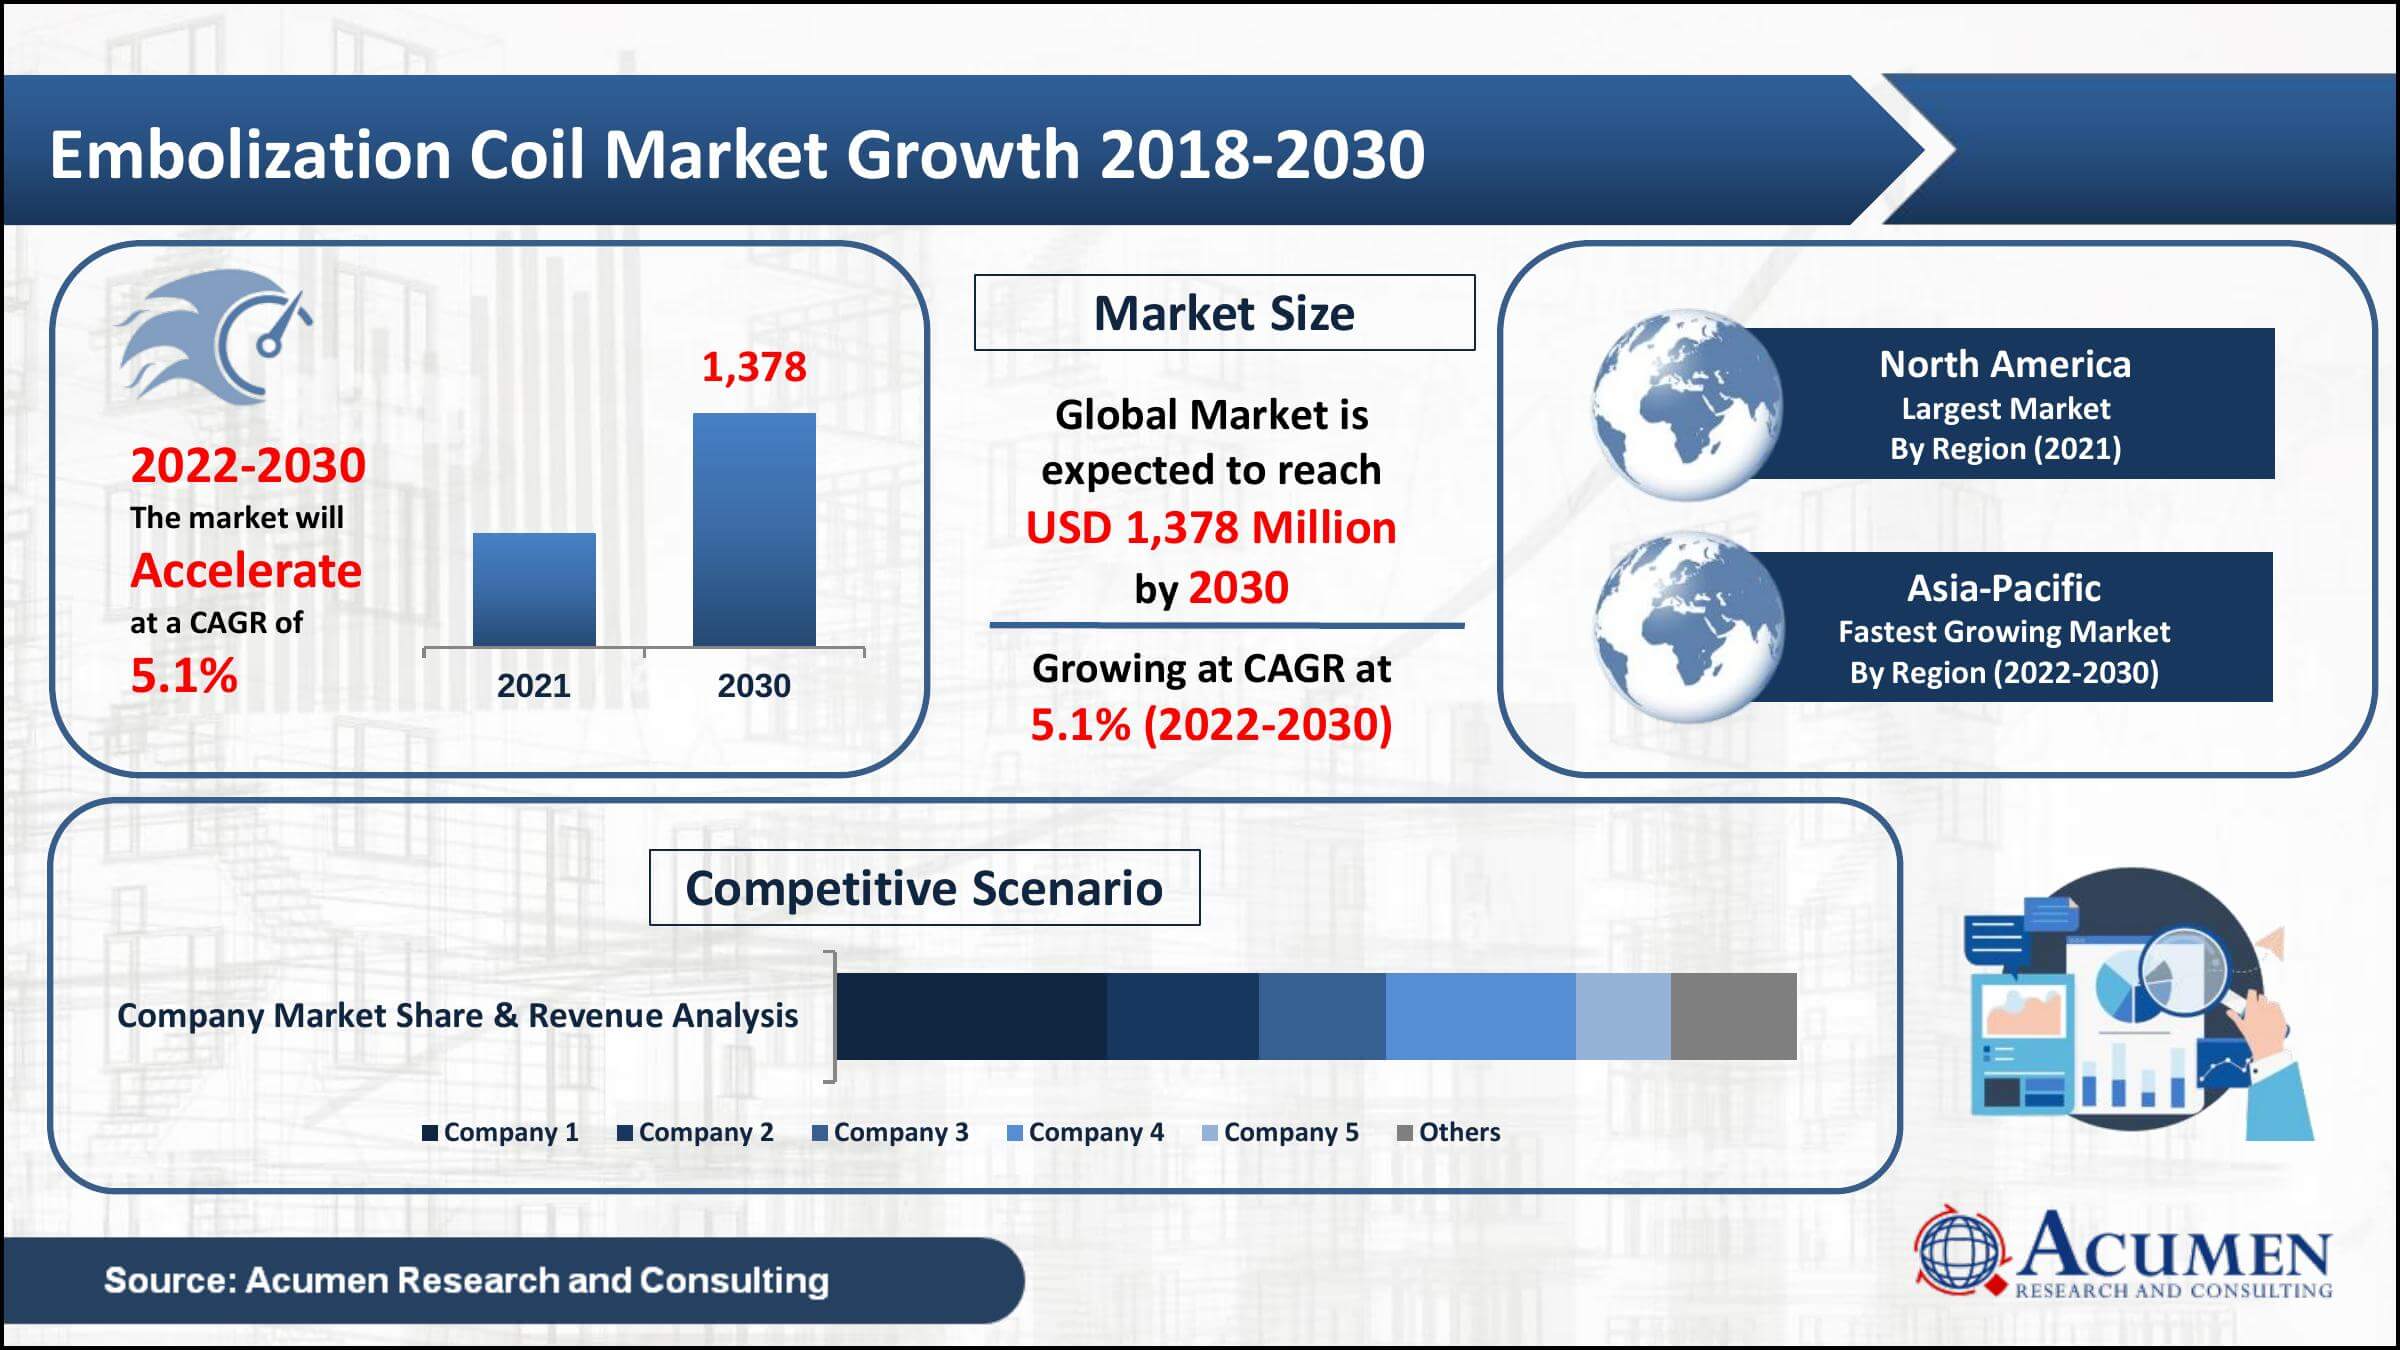 Global embolization coil market value was worth USD 897 Million in 2021, with a 5.1% CAGR from 2022 to 2030